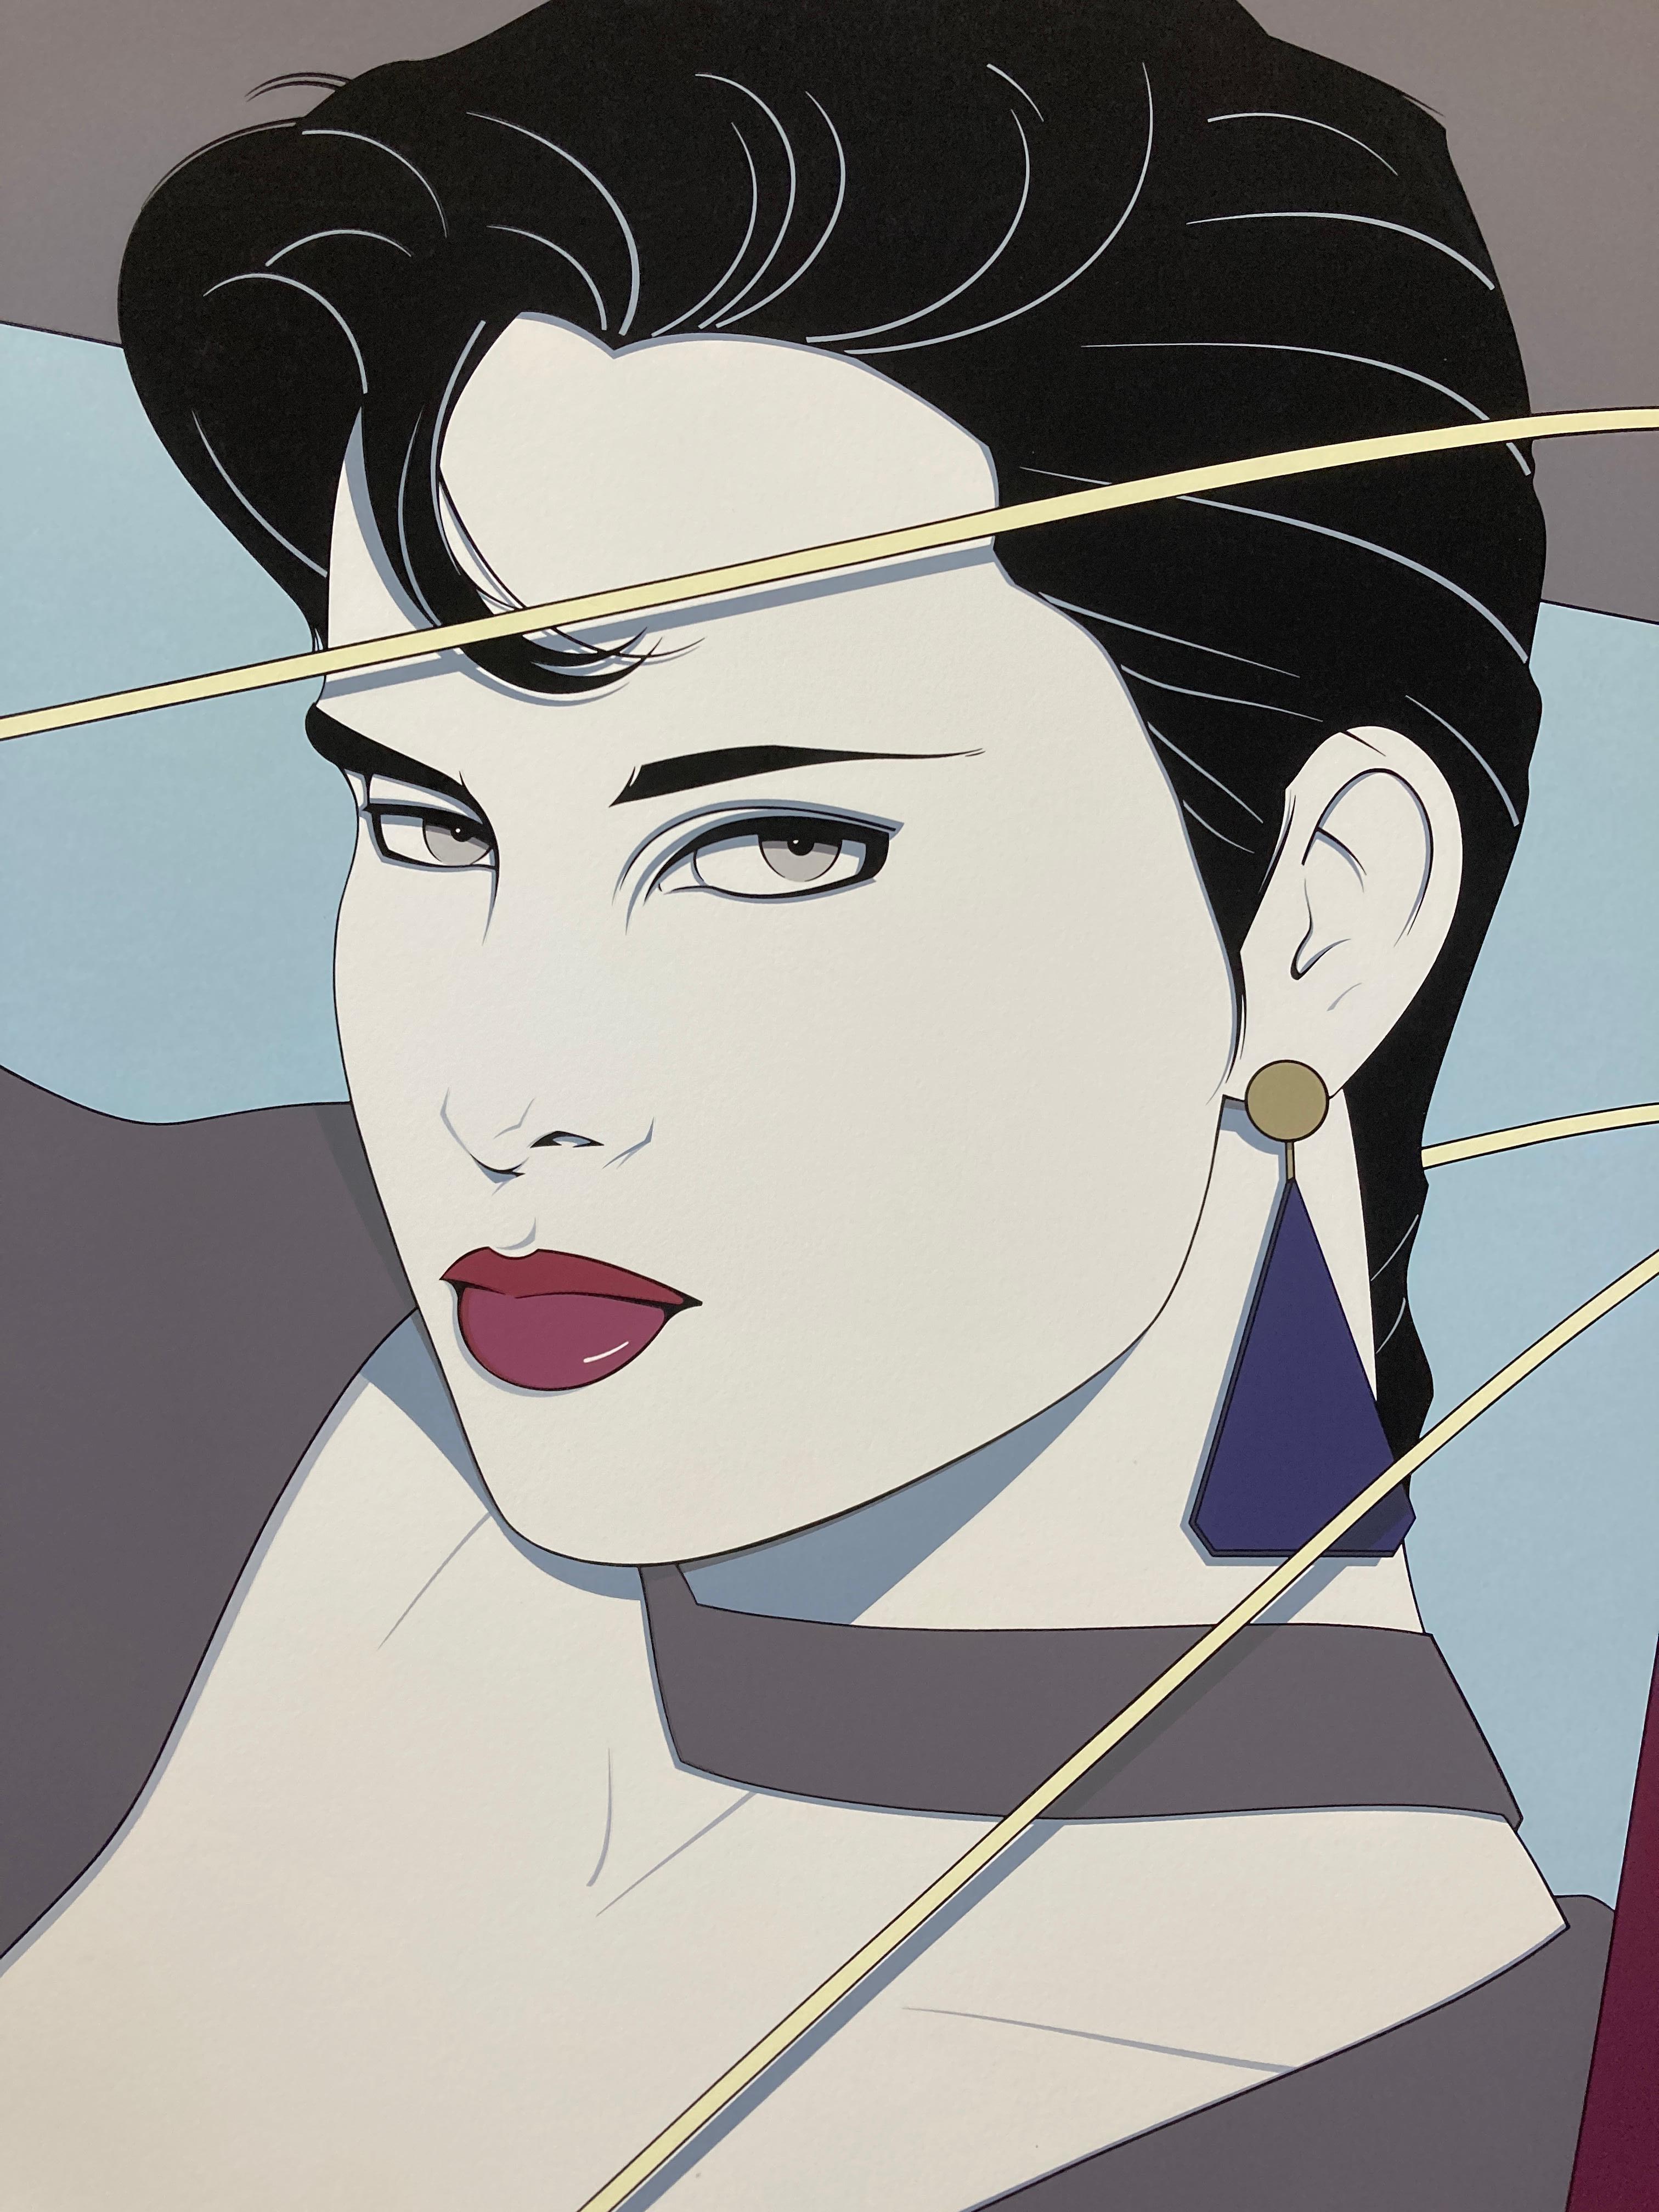 'Nagel Commemorative Eleven' (NC 11), 1987
Serigraph on 100% cotton archival grade heavyweight rag paper
Published by Mirage Editions, a limited run edition, signed in plate
Printed by Samper Silkscreen
Released for Merrill-Chase Gallery, Chicago,